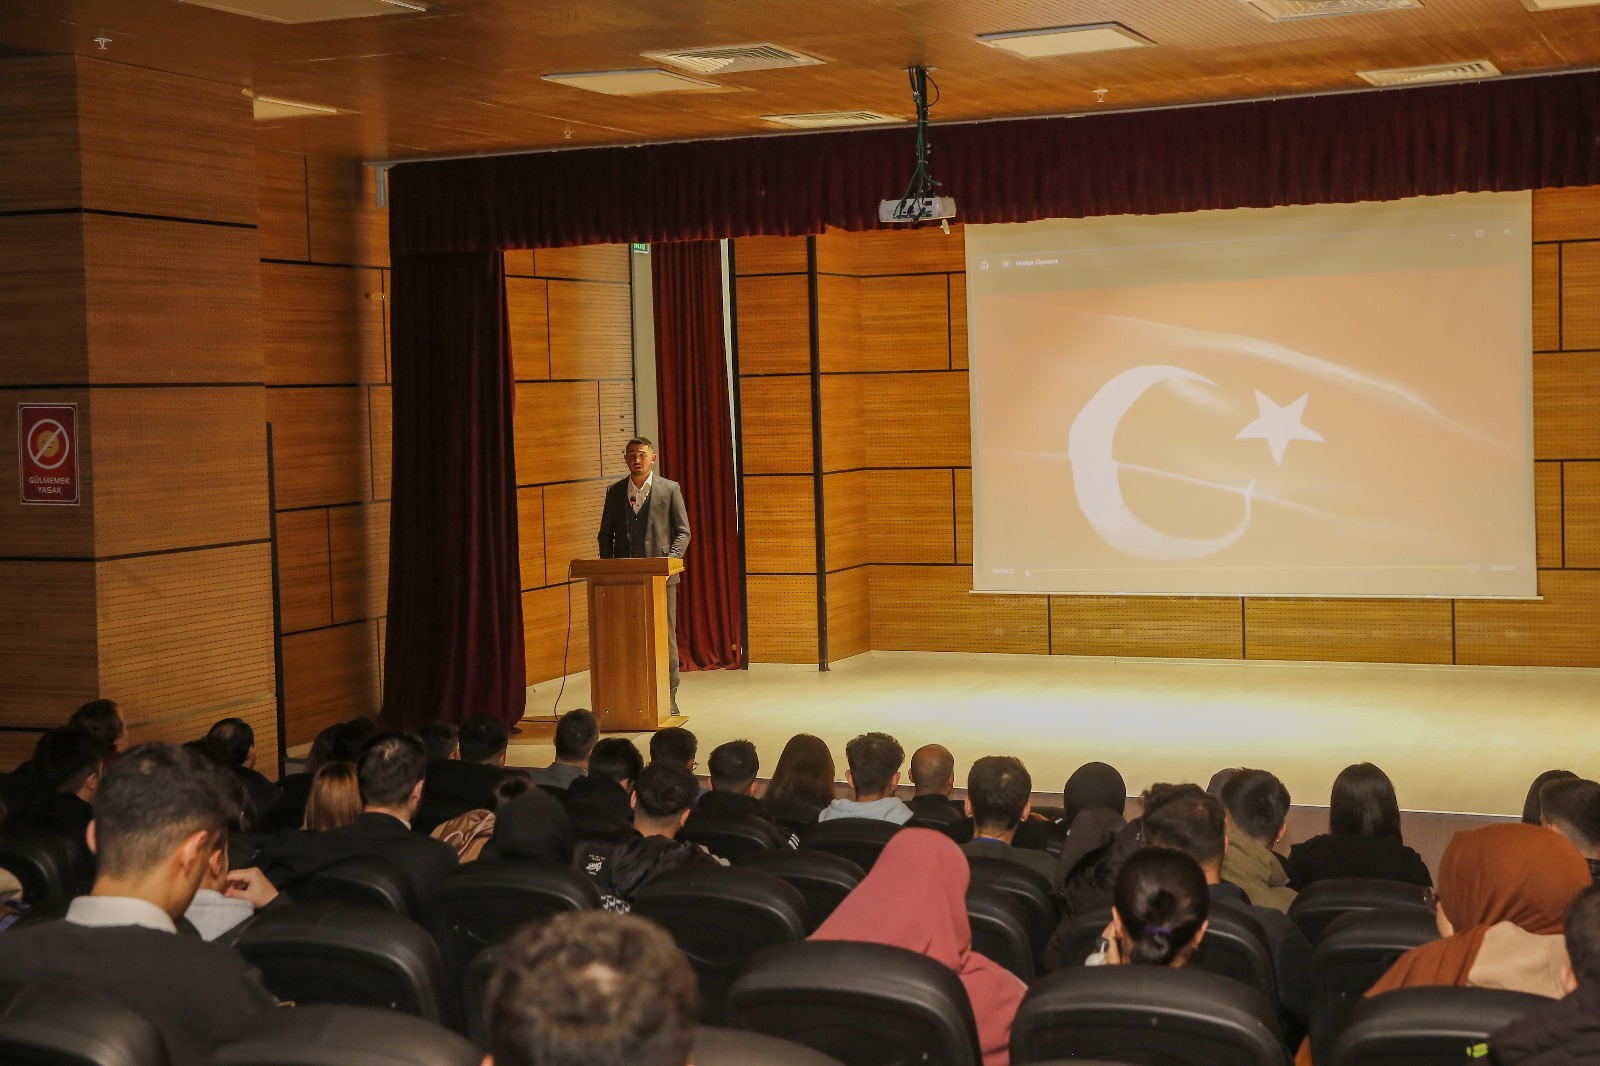 We commemorated the 18 March Çanakkale Victory with a Poetry Recital and Conference